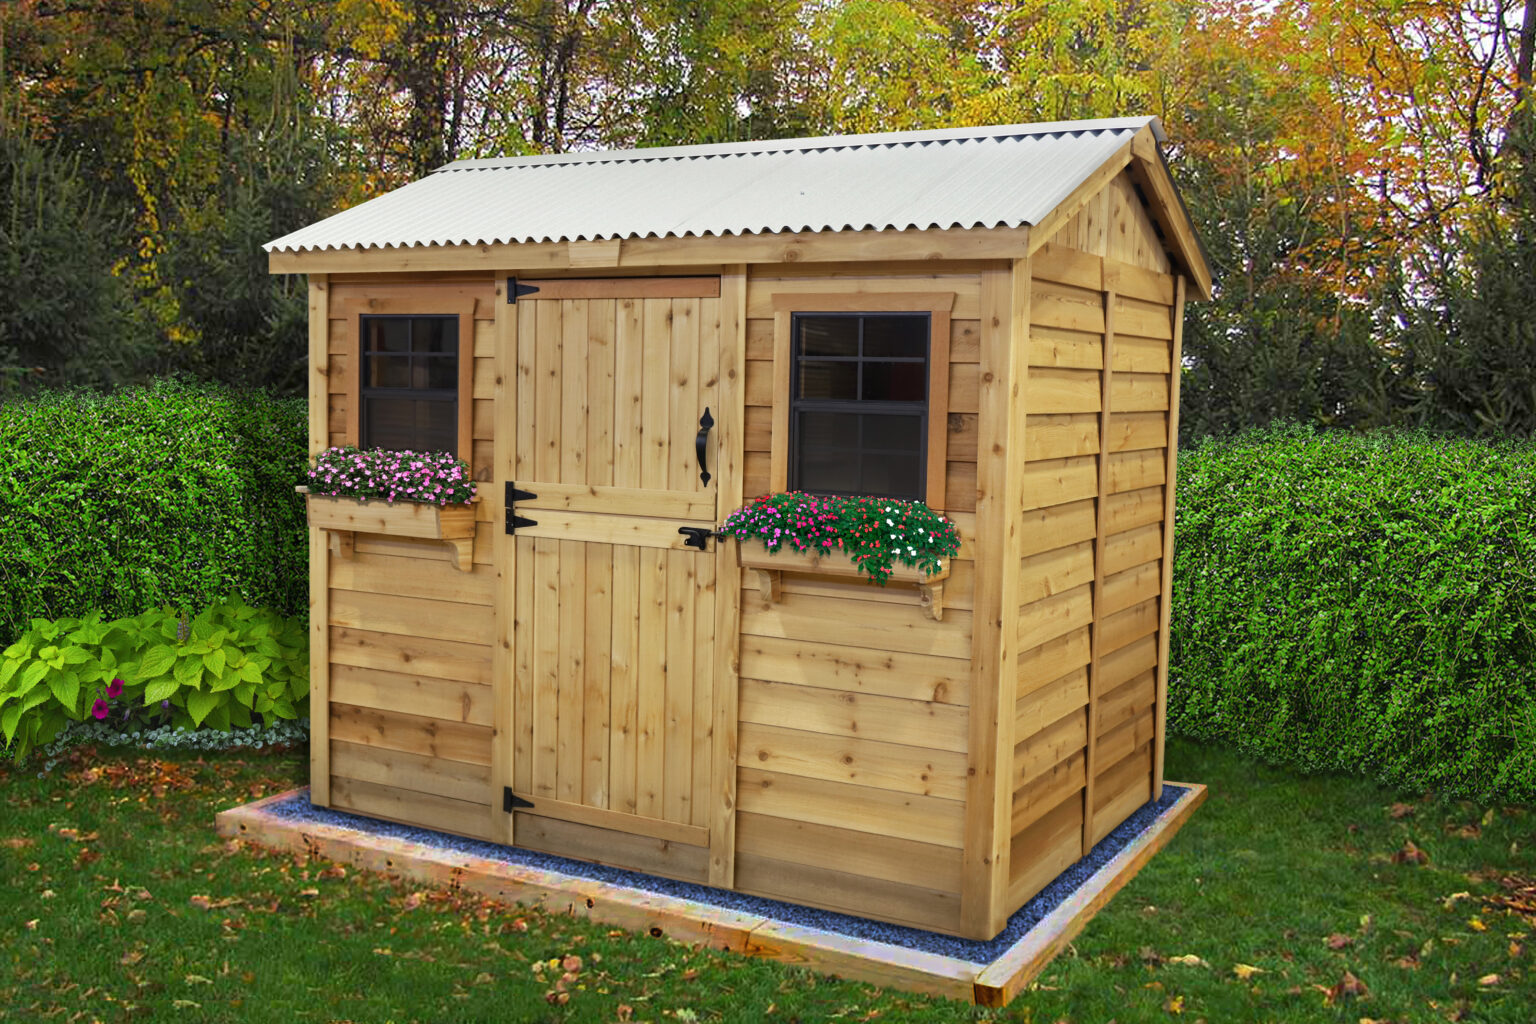 Shed Kits for Sale 9x6 Cabana - Outdoor Living Today